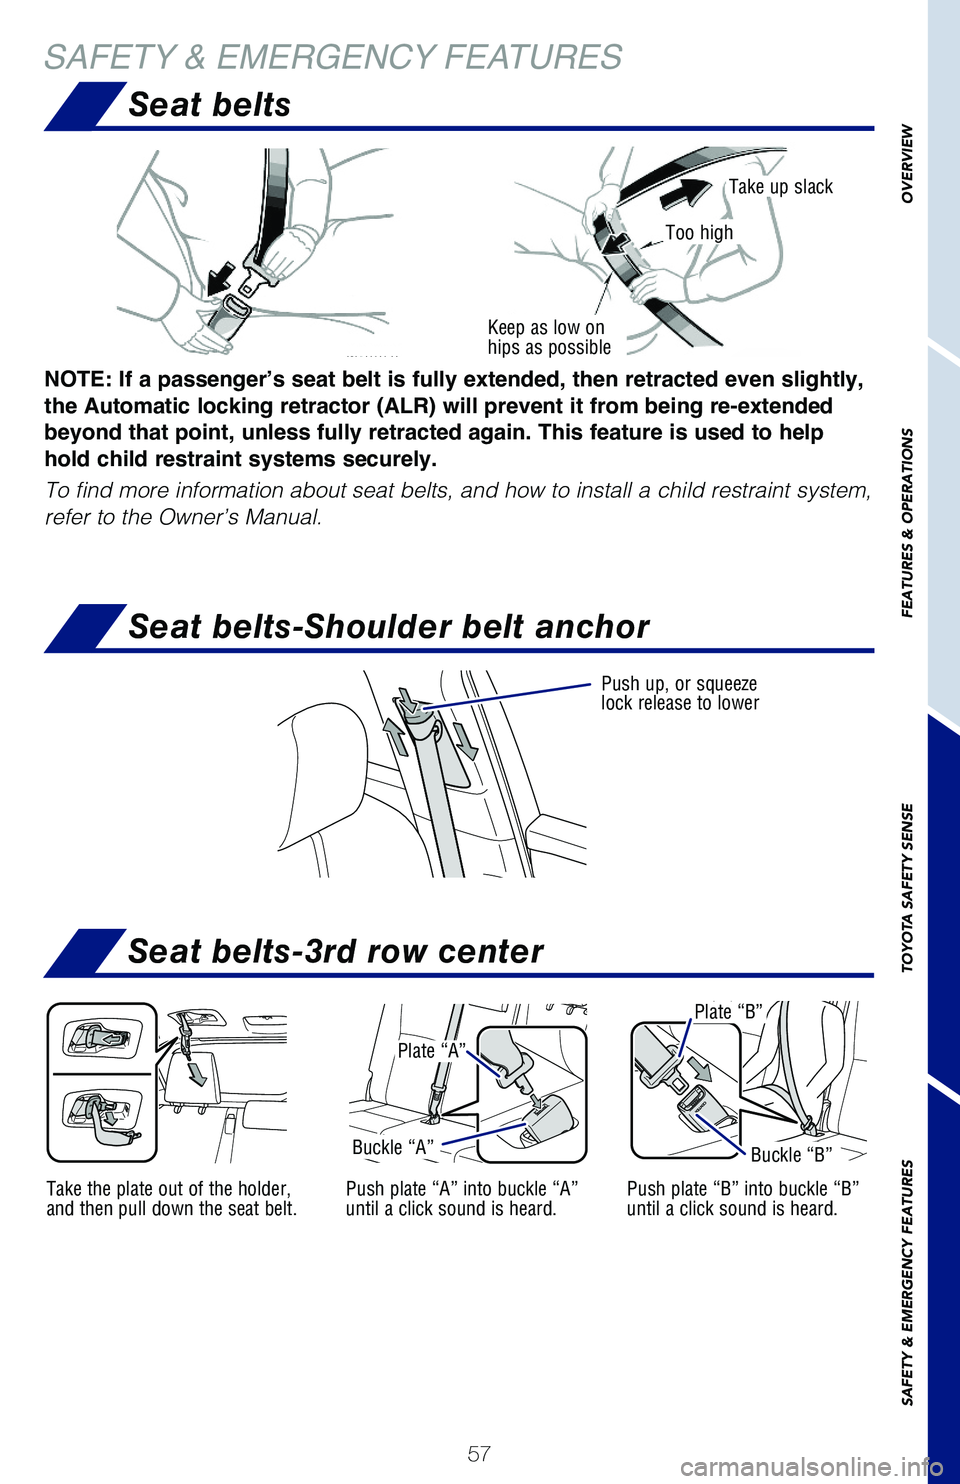 TOYOTA HIGHLANDER 2021  Owners Manual (in English) 57
OVERVIEW
FEATURES & OPERATIONS
TOYOTA SAFETY SENSE
SAFETY & EMERGENCY FEATURES
SAFETY & EMERGENCY FEATURES
Push up, or squeeze lock release to lower
Seat belts
Seat belts-3rd row center
Seat belts-